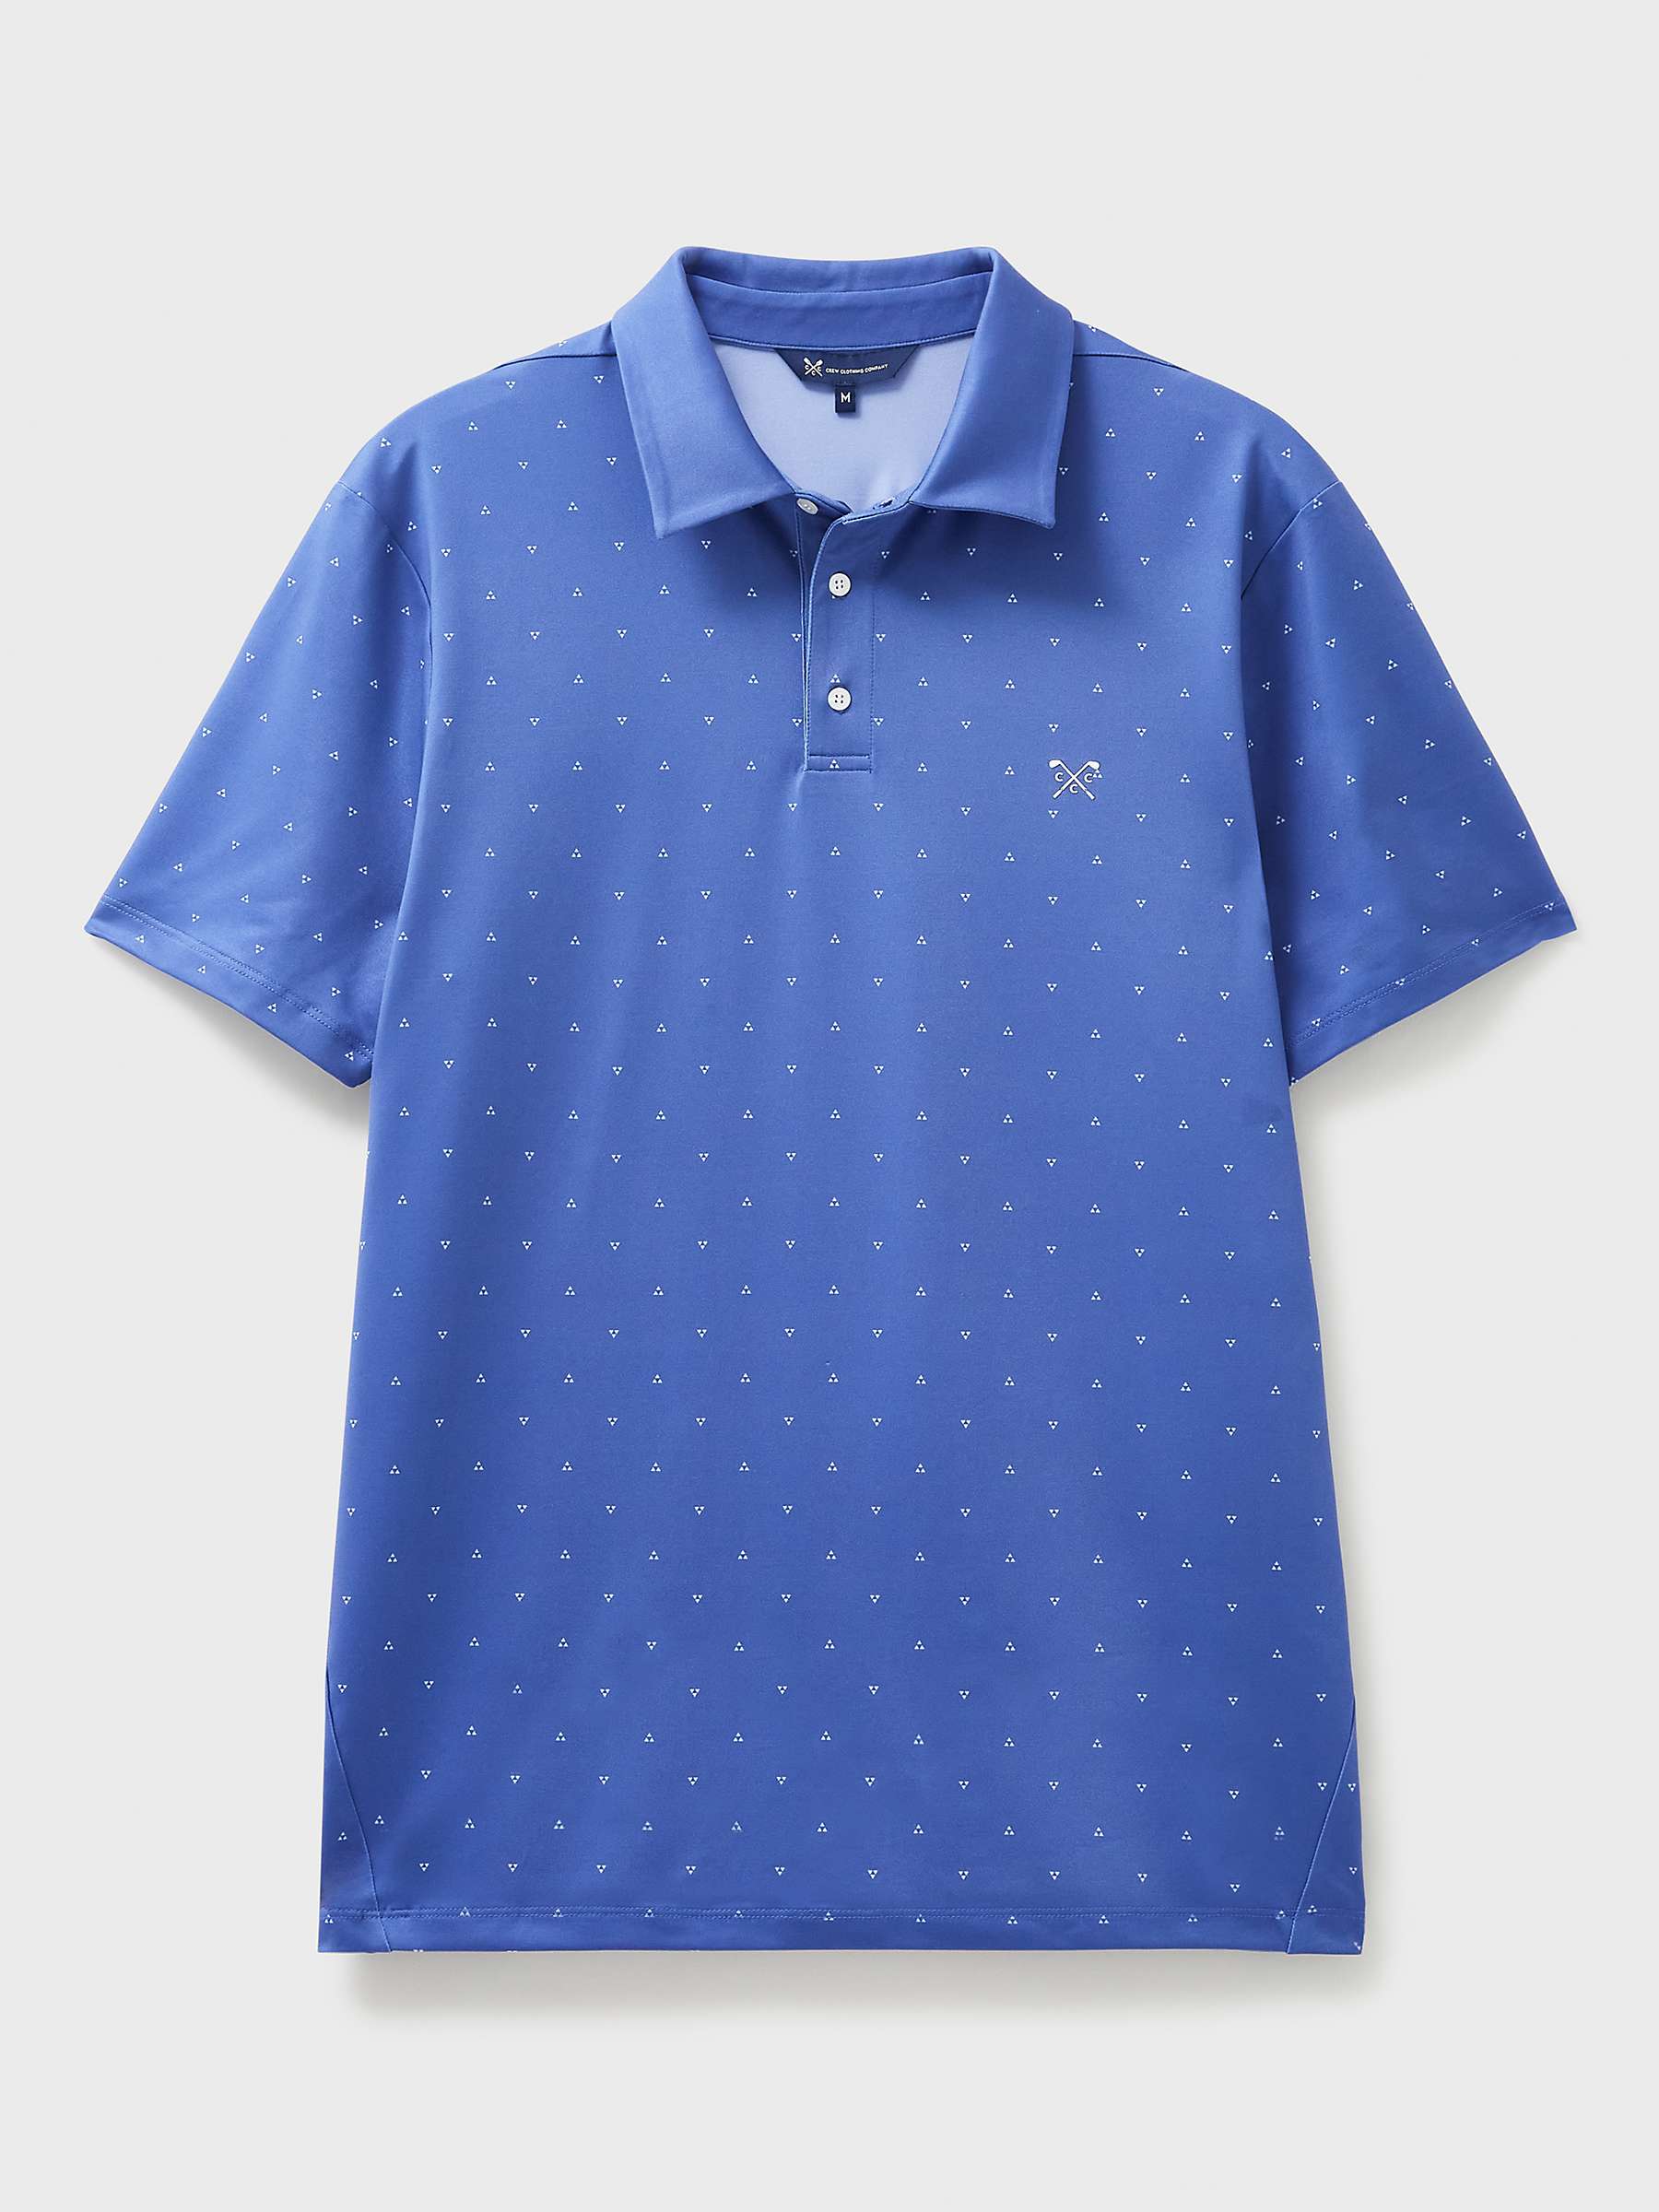 Crew Clothing Match Golf Polo Shirt, Mid Blue at John Lewis & Partners